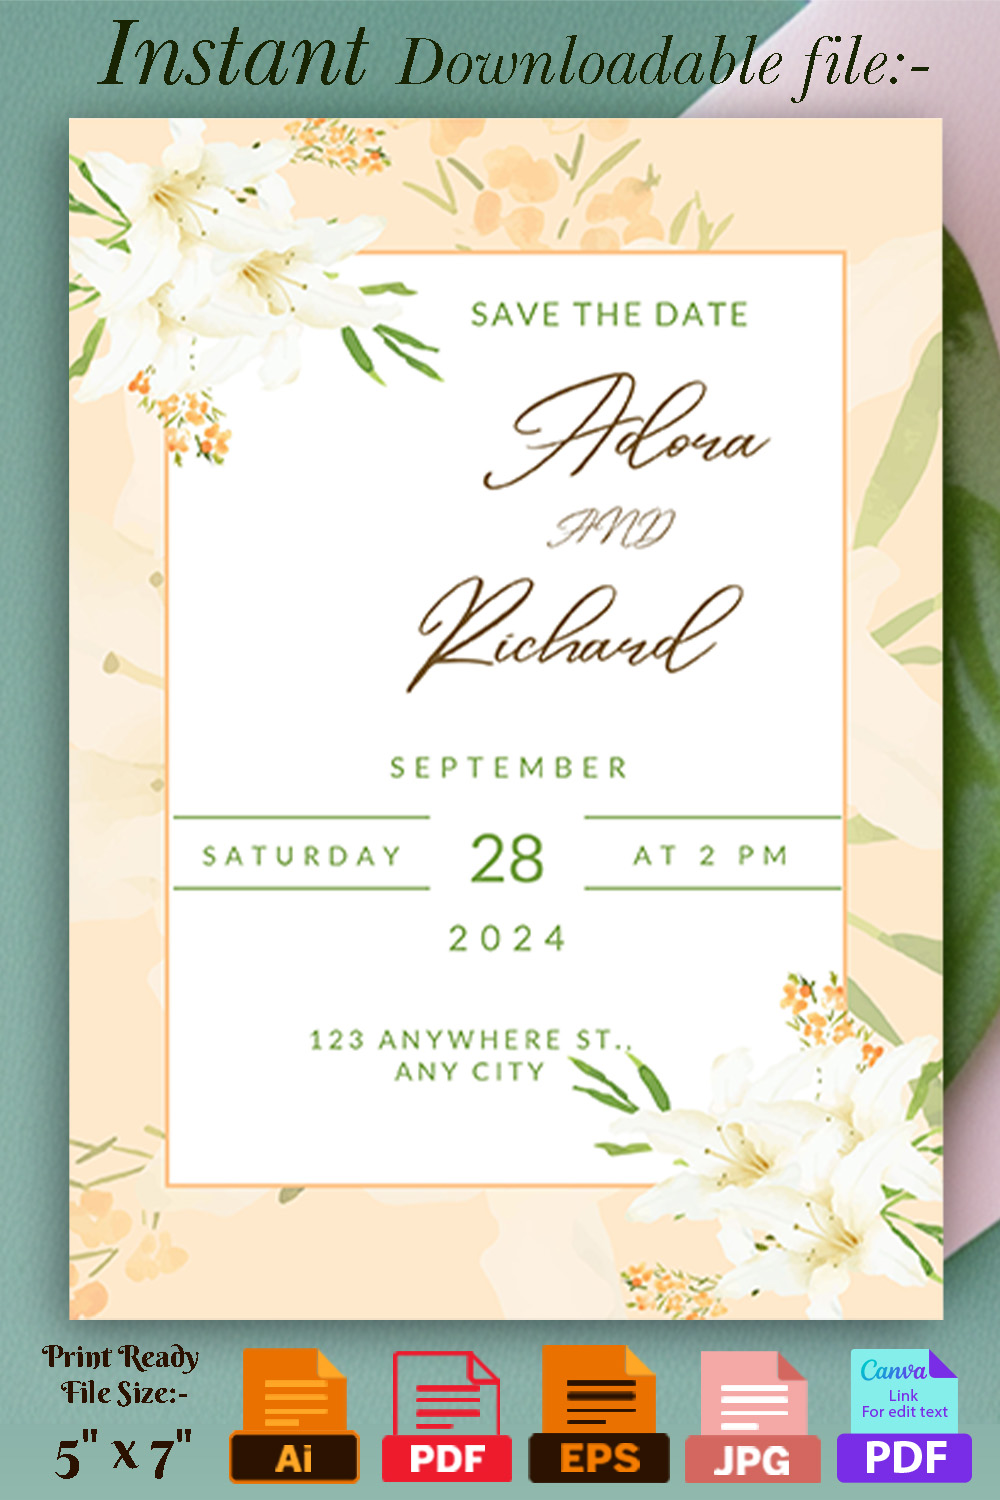 Image with beautiful wedding invitation card with flowers.